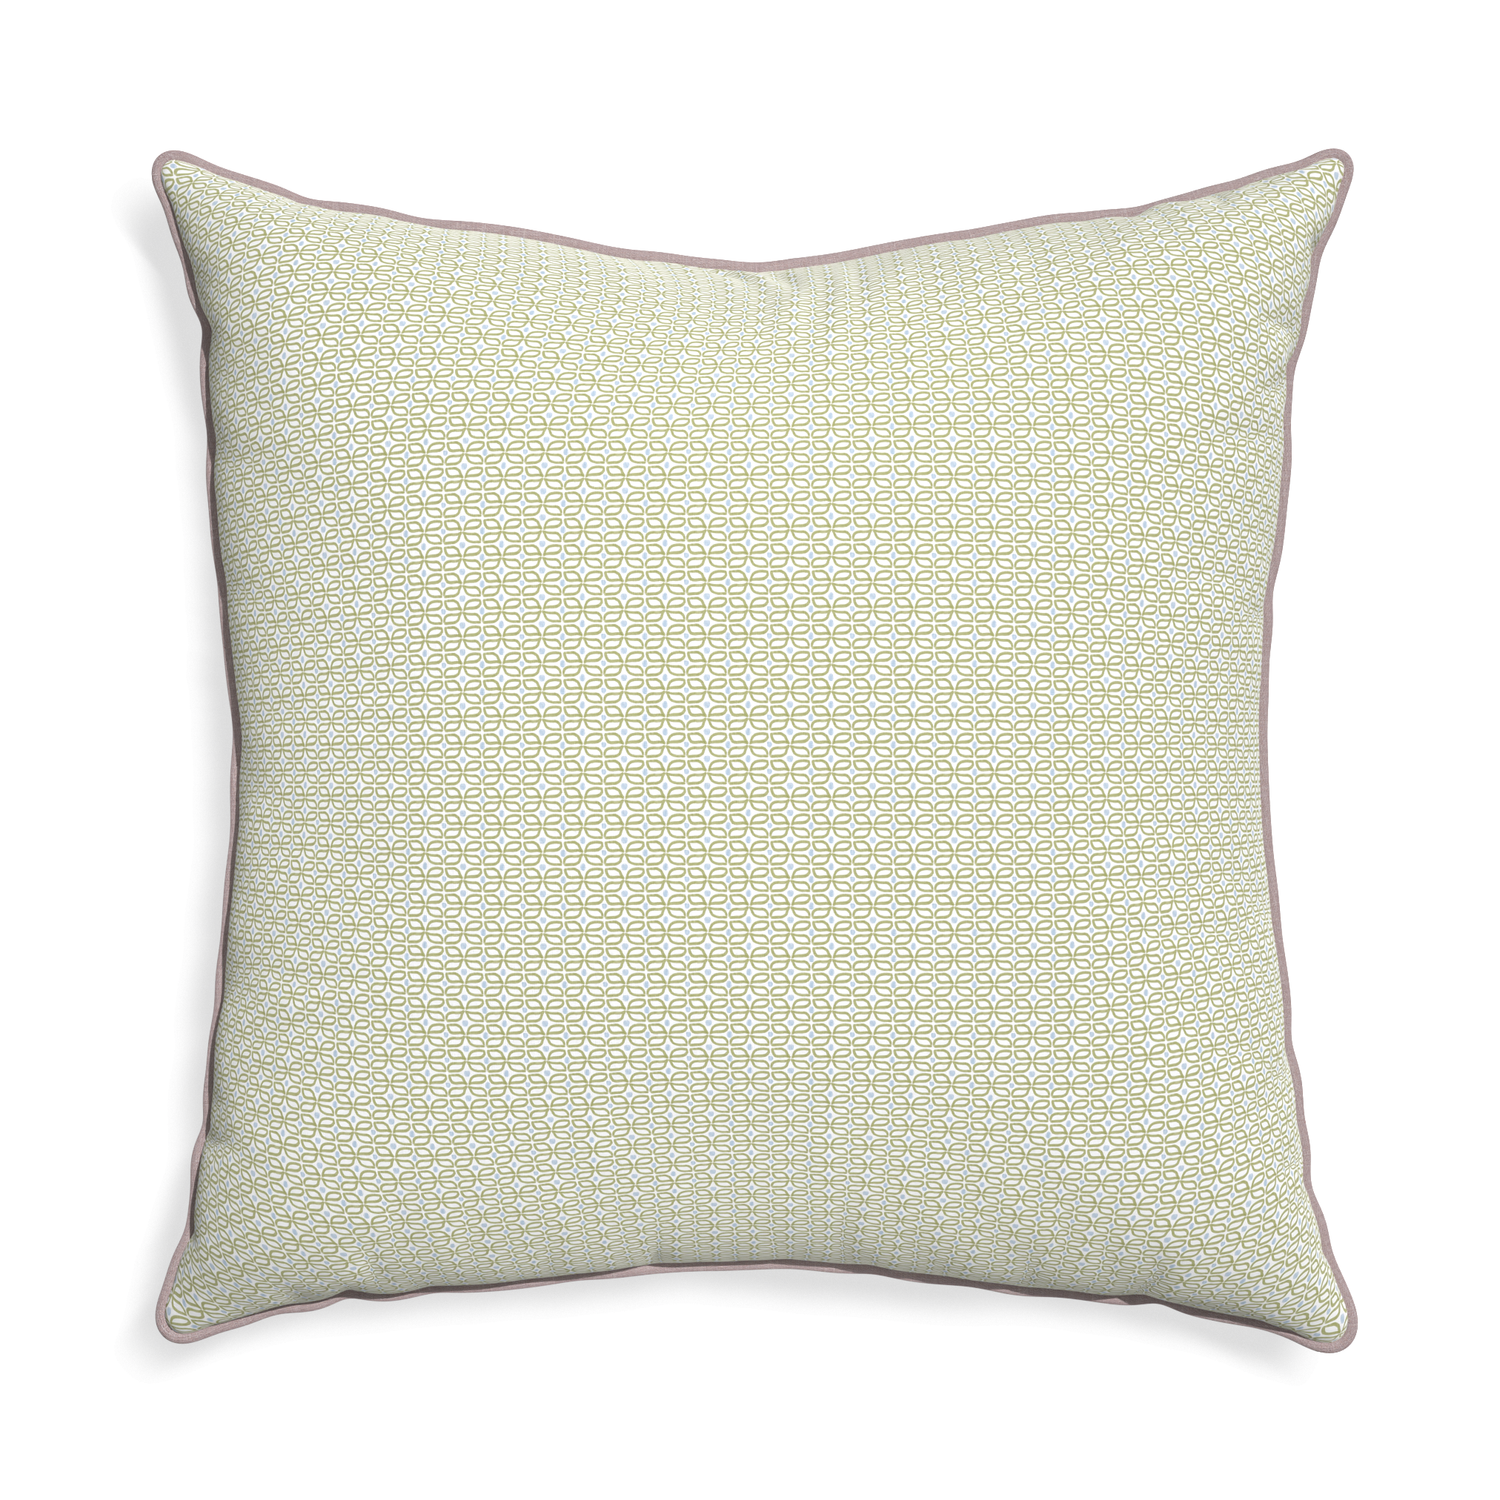 Euro-sham loomi moss custom moss green geometricpillow with orchid piping on white background